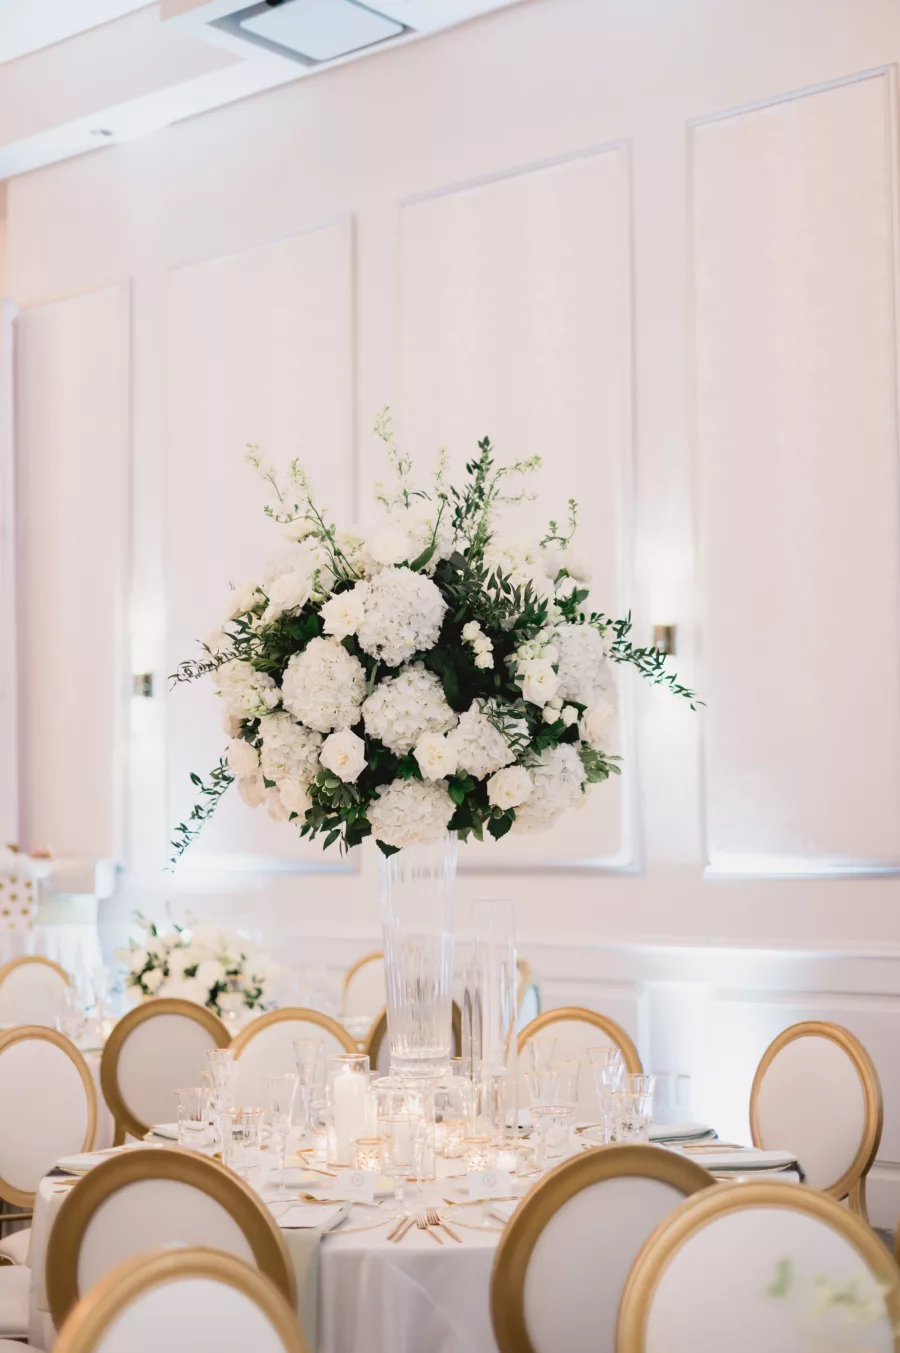 Elegant Spring White and Gold Ballroom Wedding Centerpiece Decor Ideas | White Hydrangeas, Roses, and Greenery with Tall Glass Vase | Tampa Bay Florist Bruce Wayne Florals